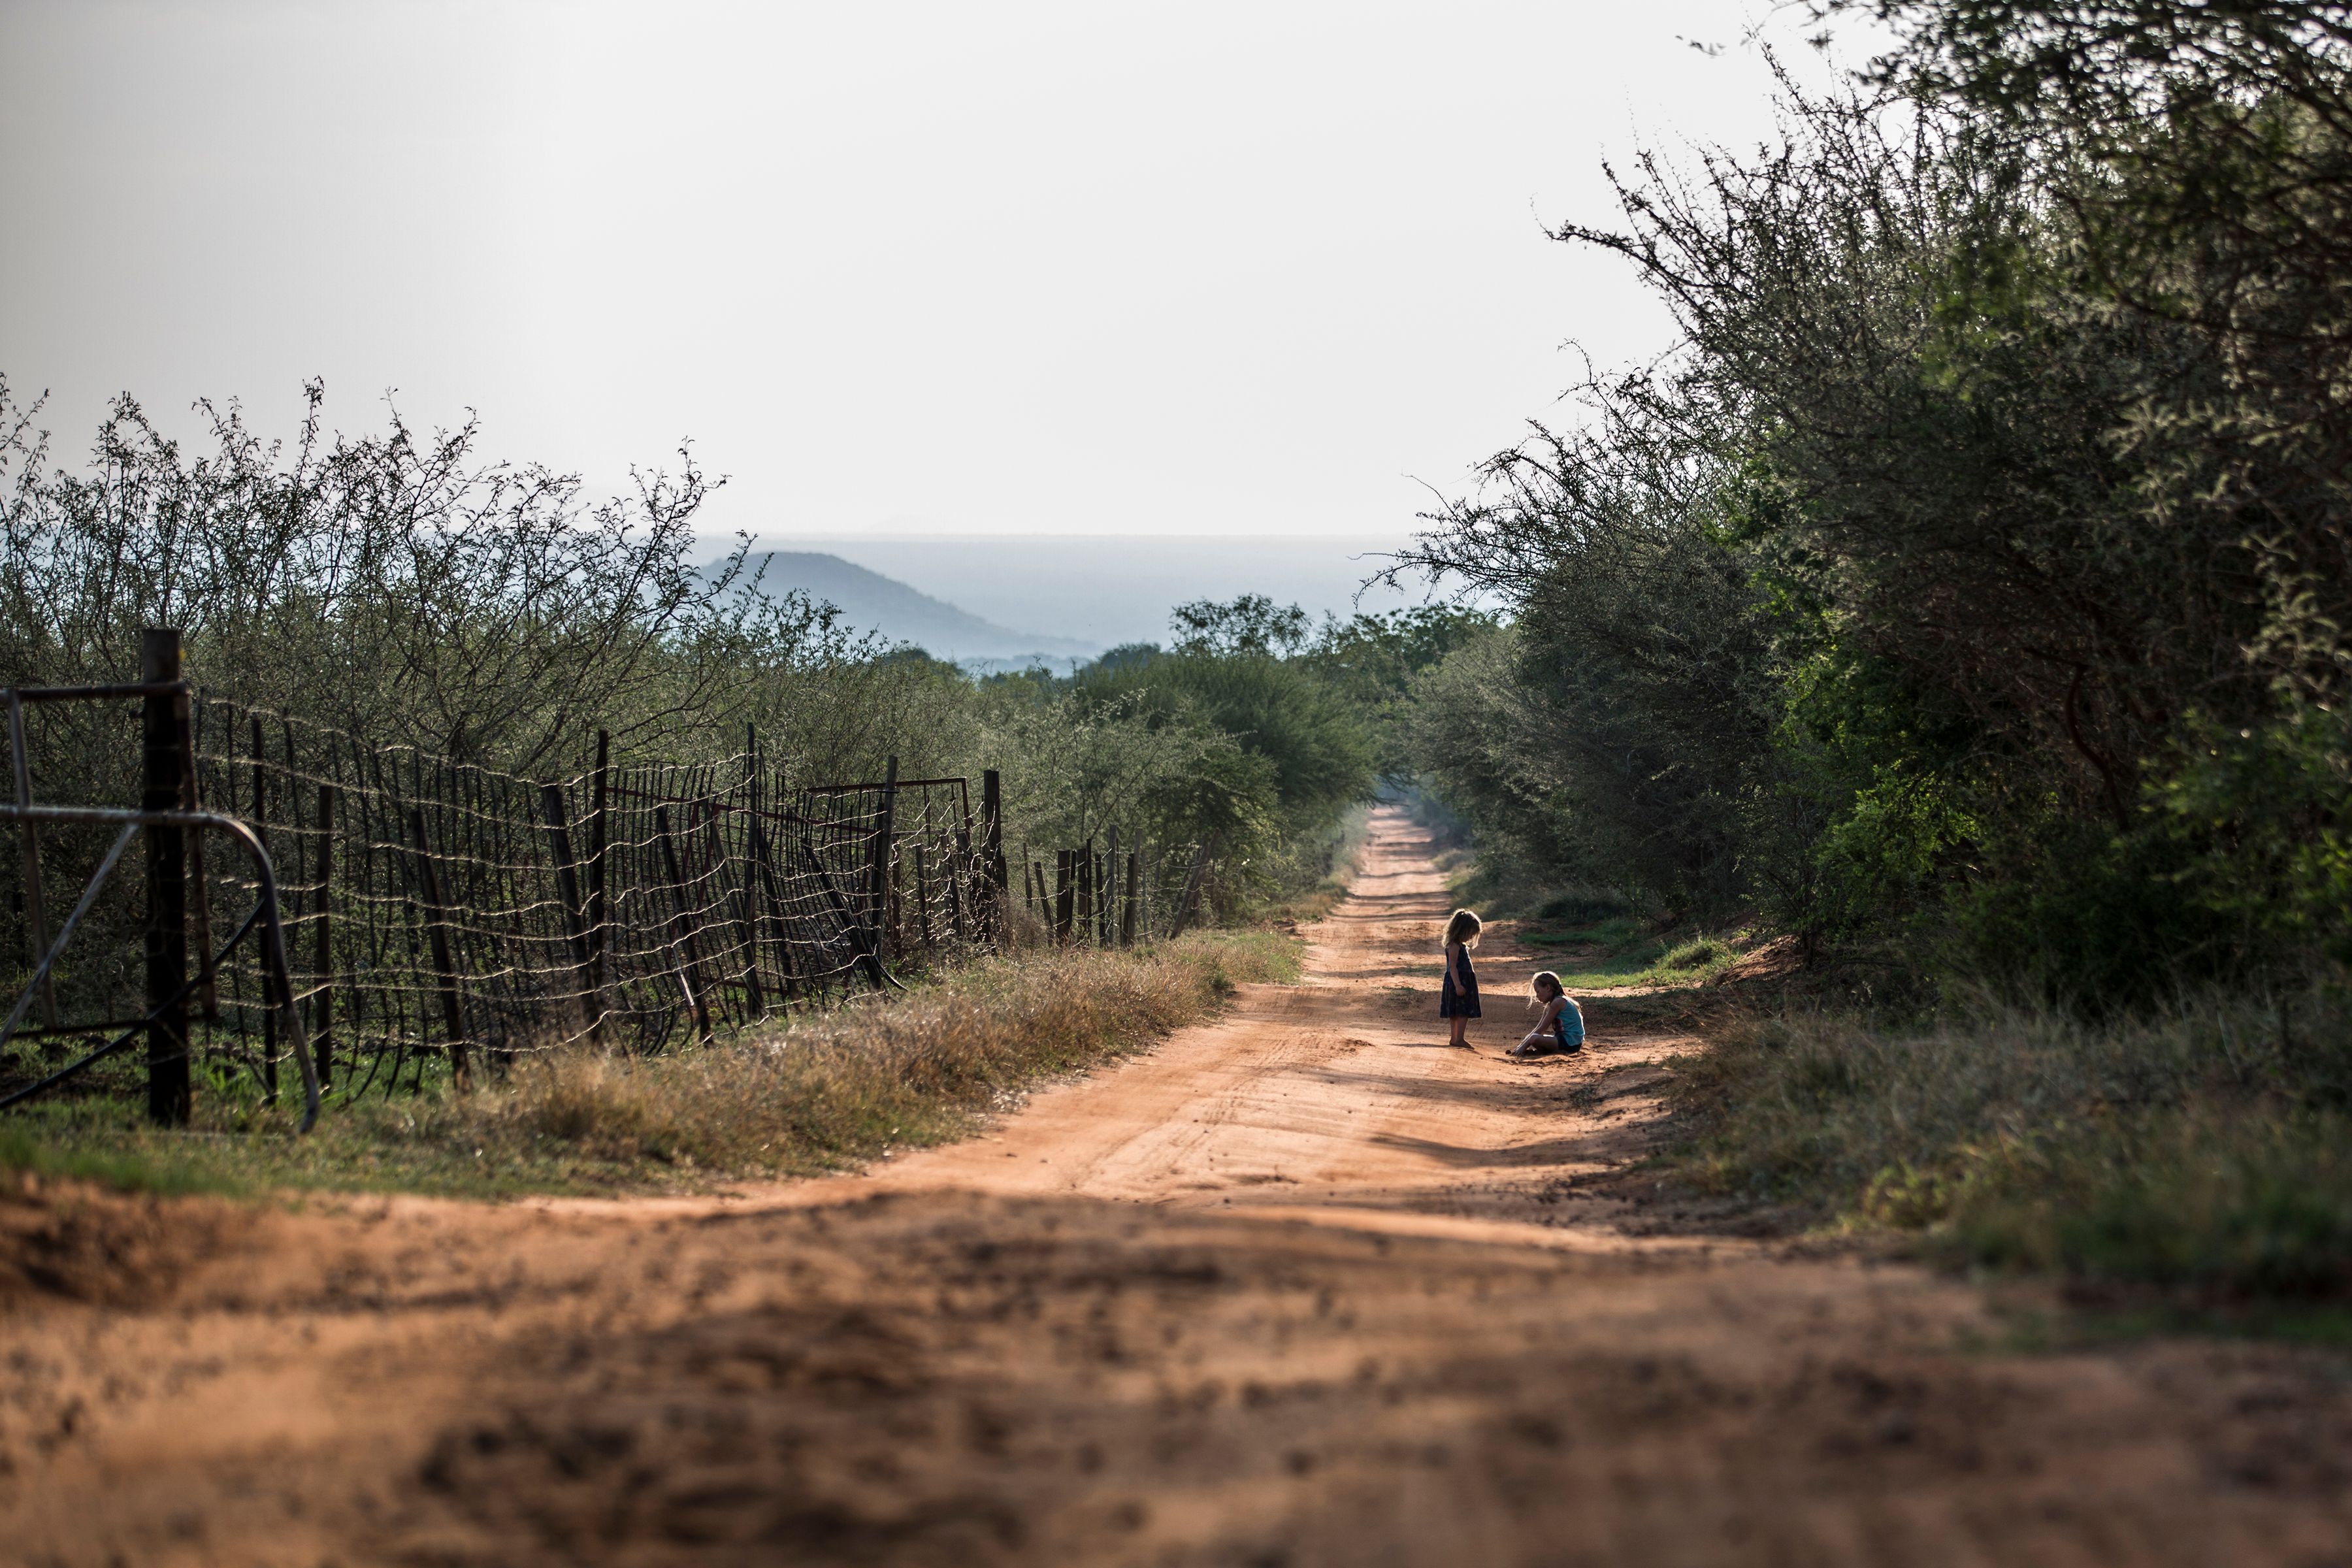 OCT 2017: Two children play on a farm in Limpopo province, South Africa. (GULSHAN KHAN&mdash;AFP/Getty Images)